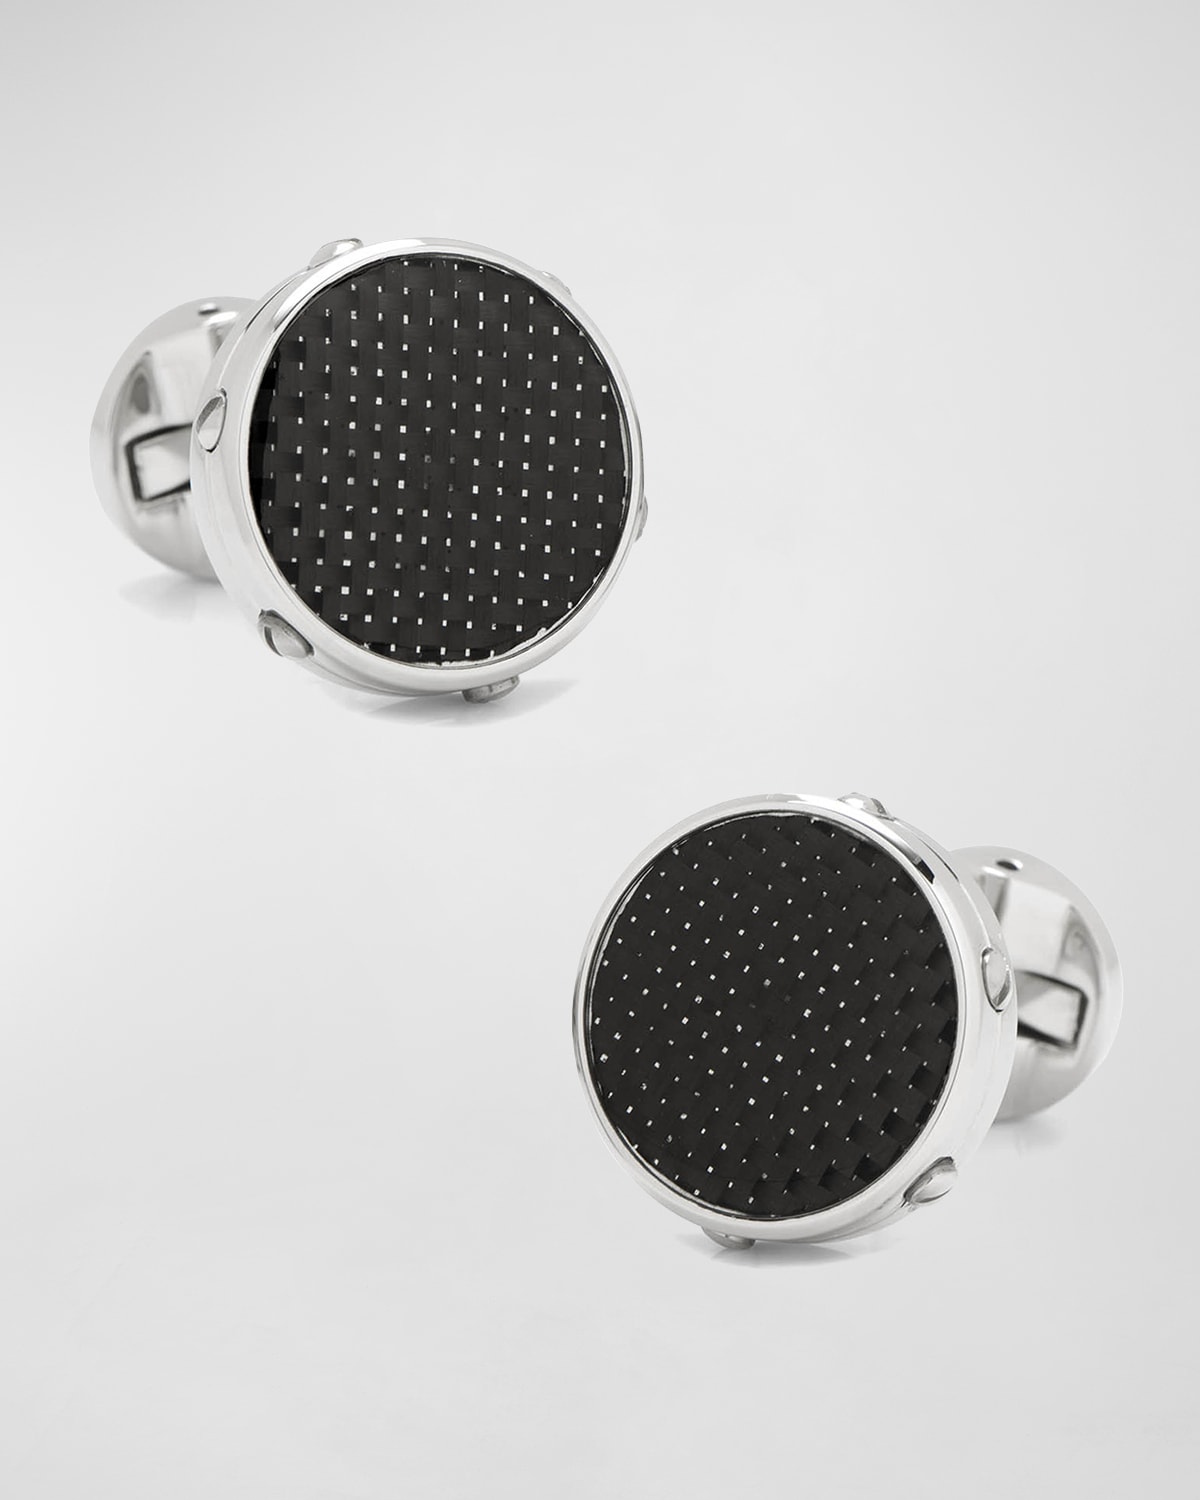 Stainless Steel Black Carbon Fiber Rectangle Cuff Links 16MM